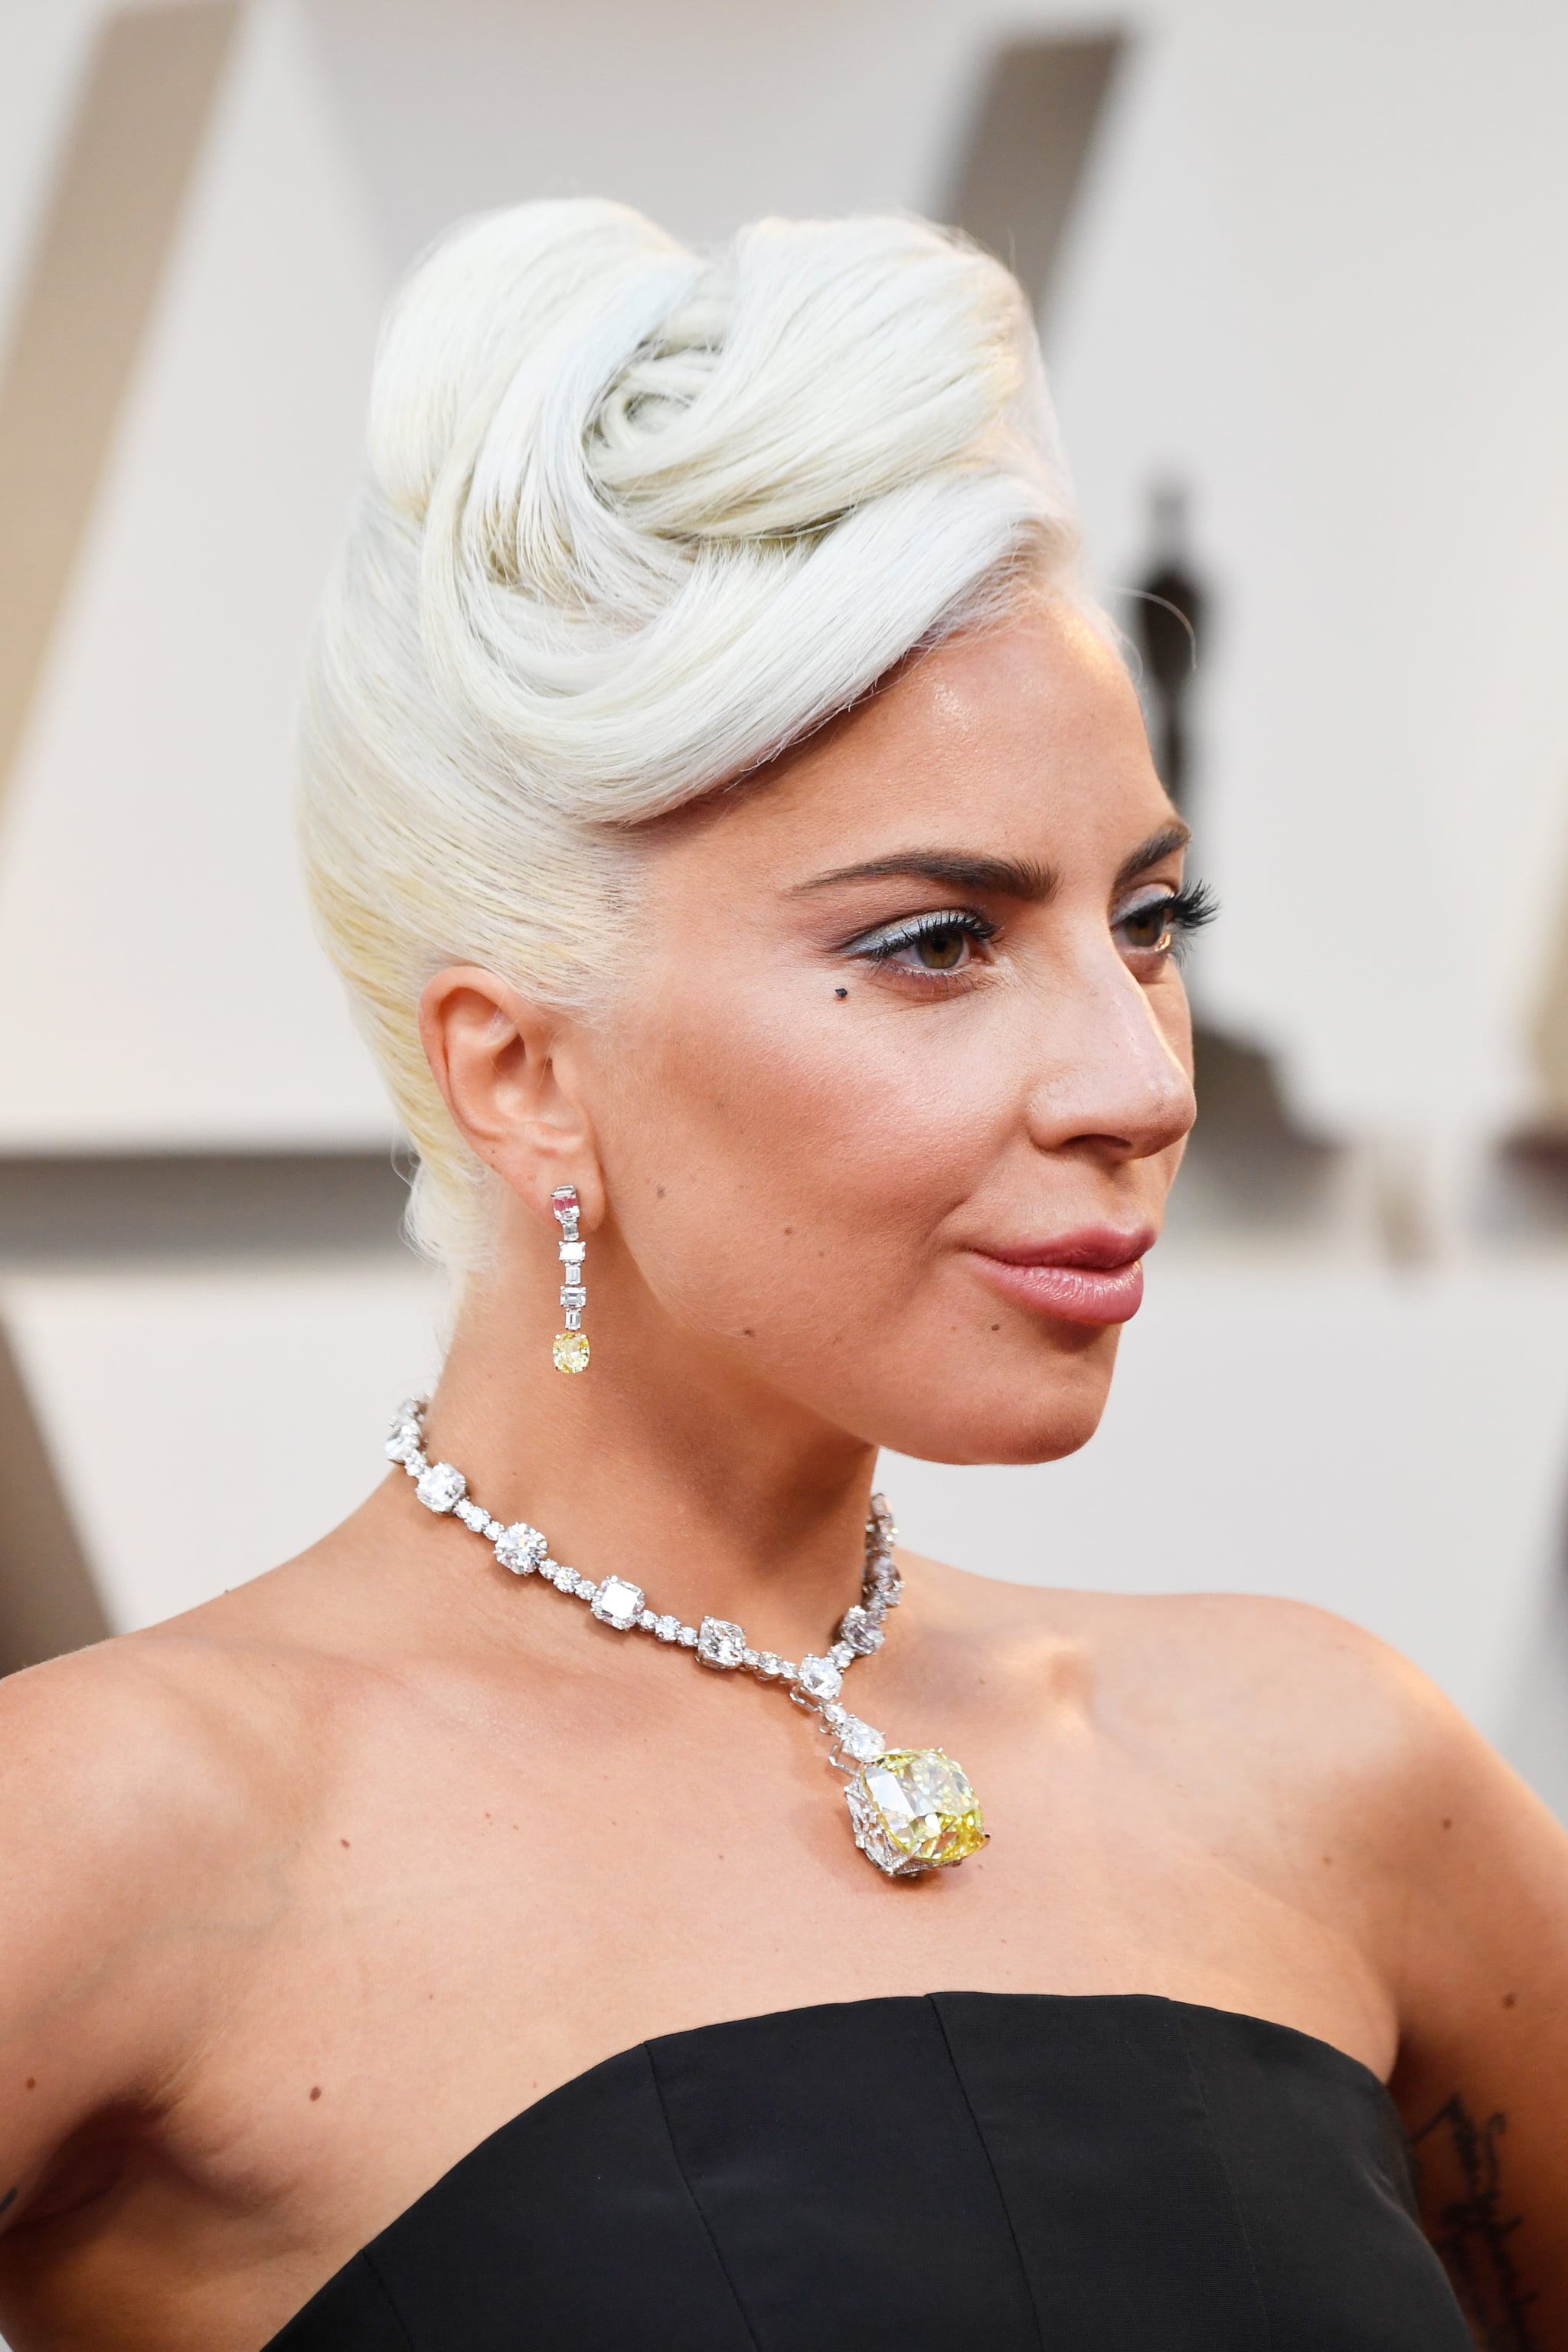 value of lady gaga's necklace